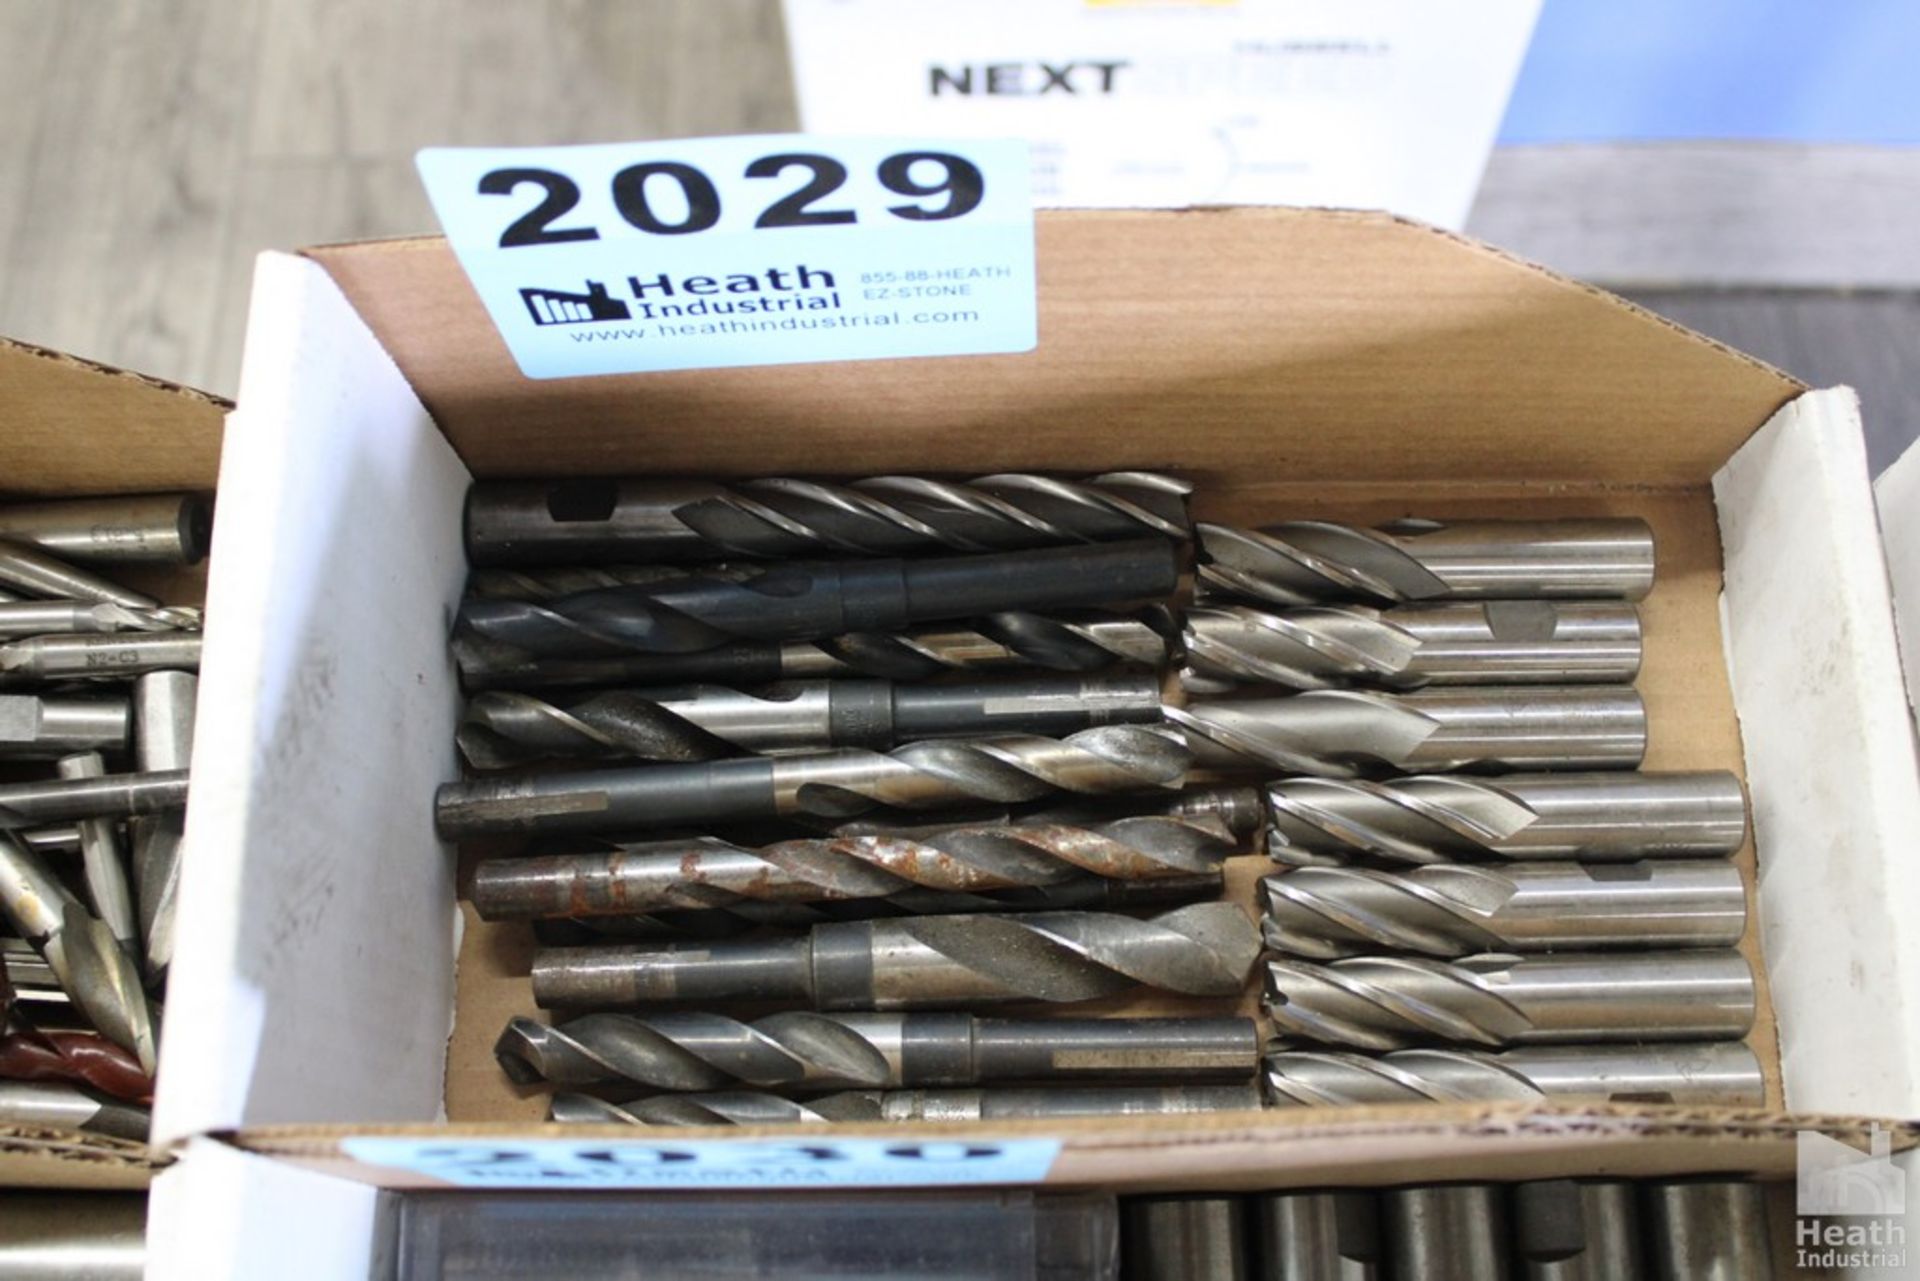 LARGE QUANTITY OF SINGLE END MILLS IN BOX